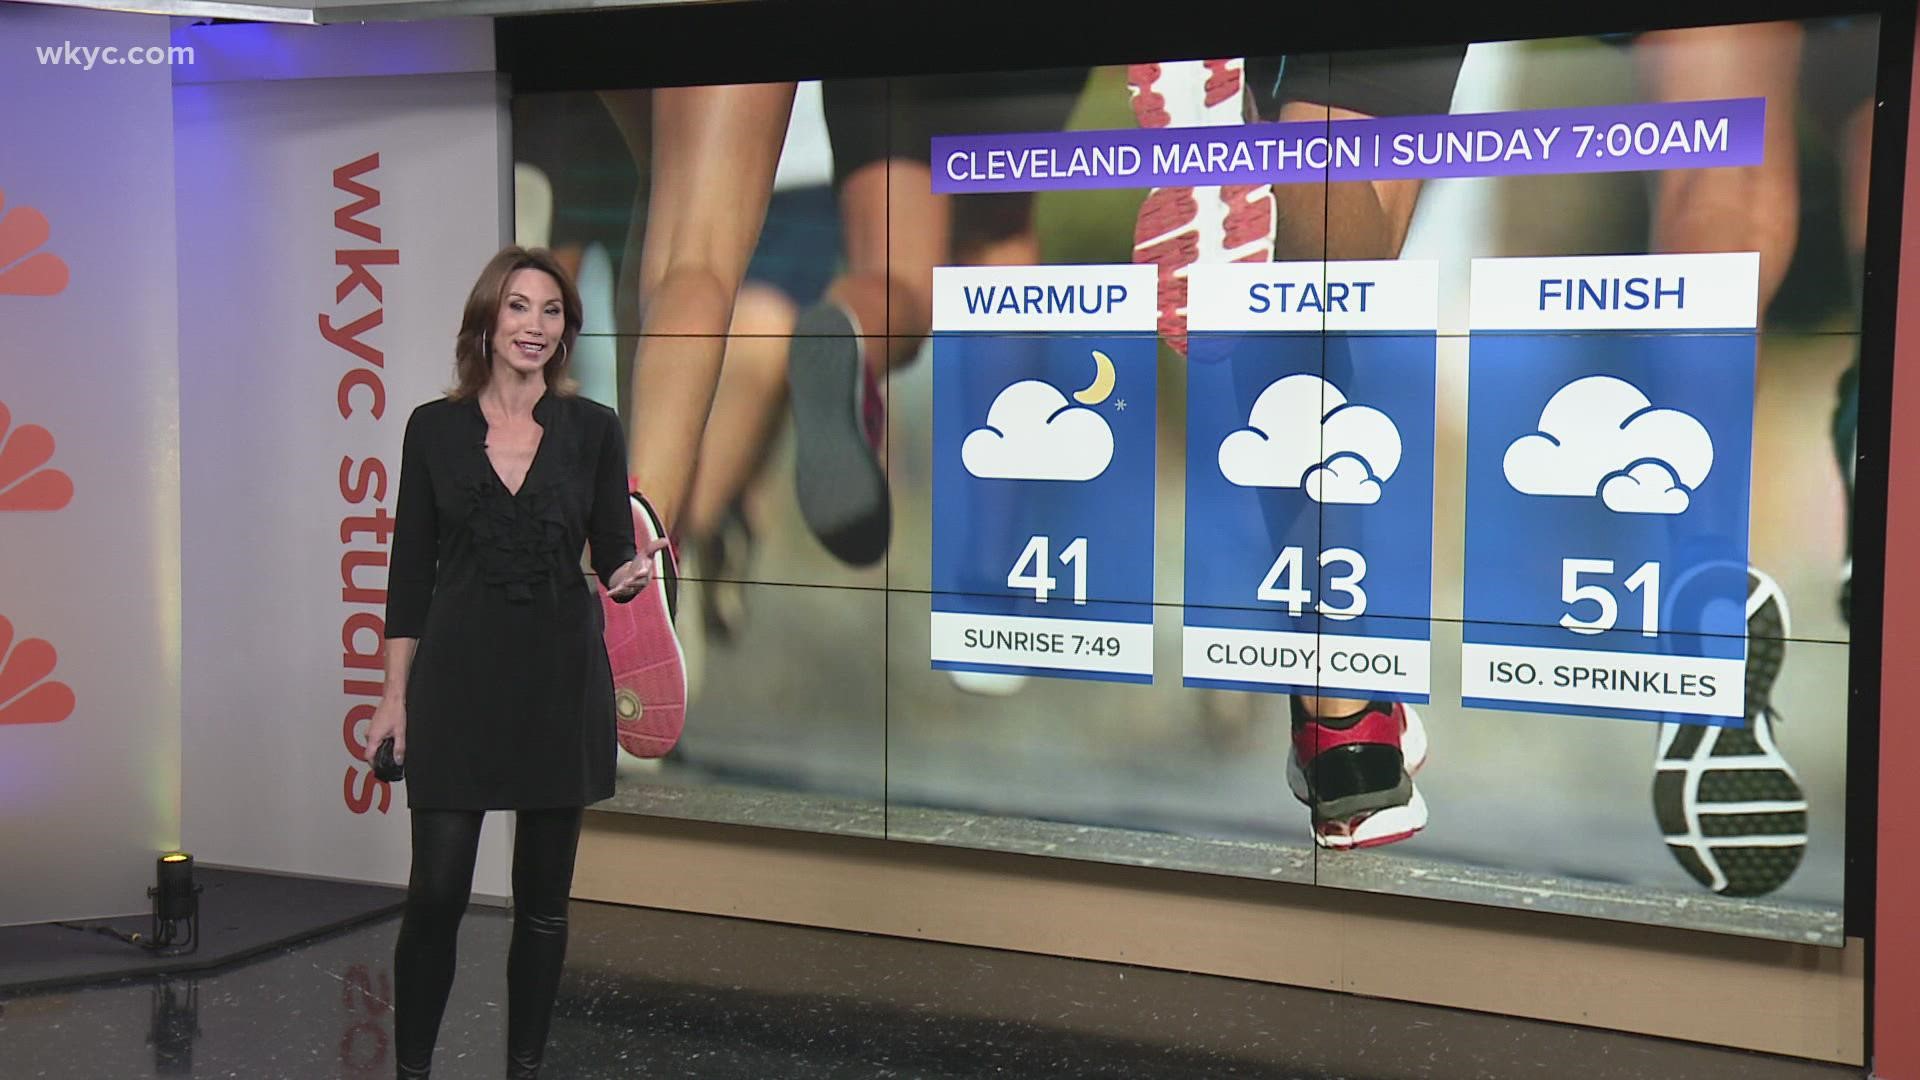 The 2021 Cleveland Marathon takes place Sunday. 3News' Betsy Kling has a preview of what to expect from the weather conditions.